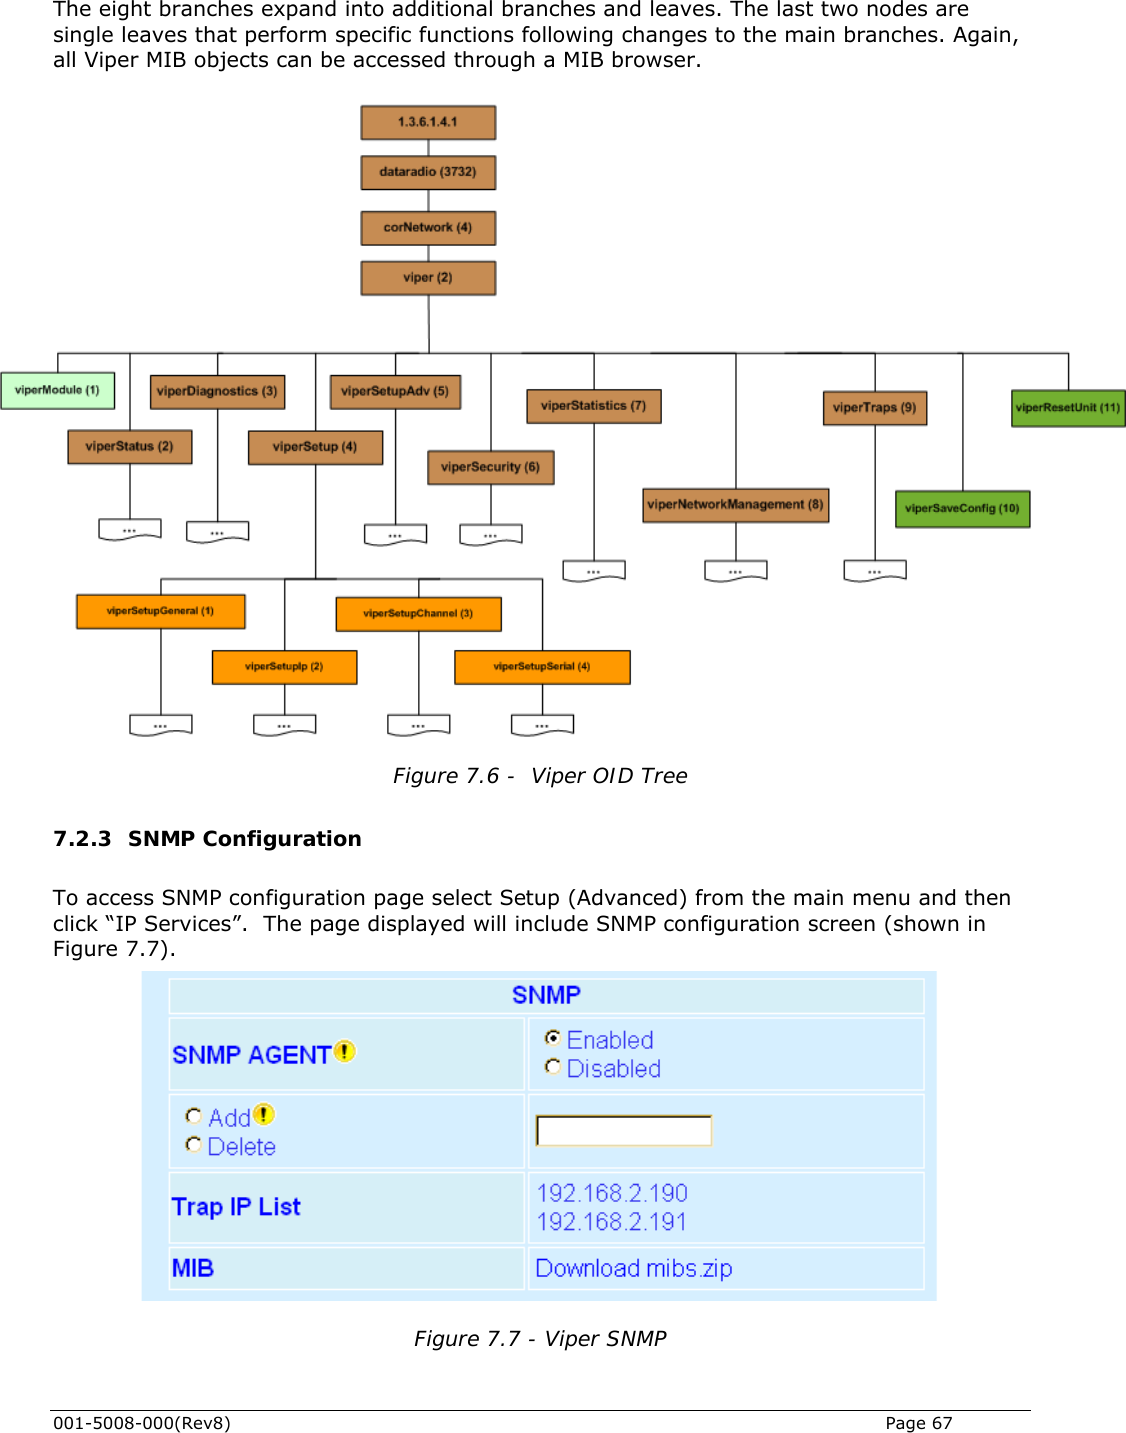   The eight branches expand into additional branches and leaves. The last two nodes are single leaves that perform specific functions following changes to the main branches. Again, all Viper MIB objects can be accessed through a MIB browser. Figure 7.6 -  Viper OID Tree  7.2.3 SNMP Configuration   To access SNMP configuration page select Setup (Advanced) from the main menu and then click “IP Services”.  The page displayed will include SNMP configuration screen (shown in Figure 7.7).  Figure 7.7 - Viper SNMP  001-5008-000(Rev8)   Page 67 